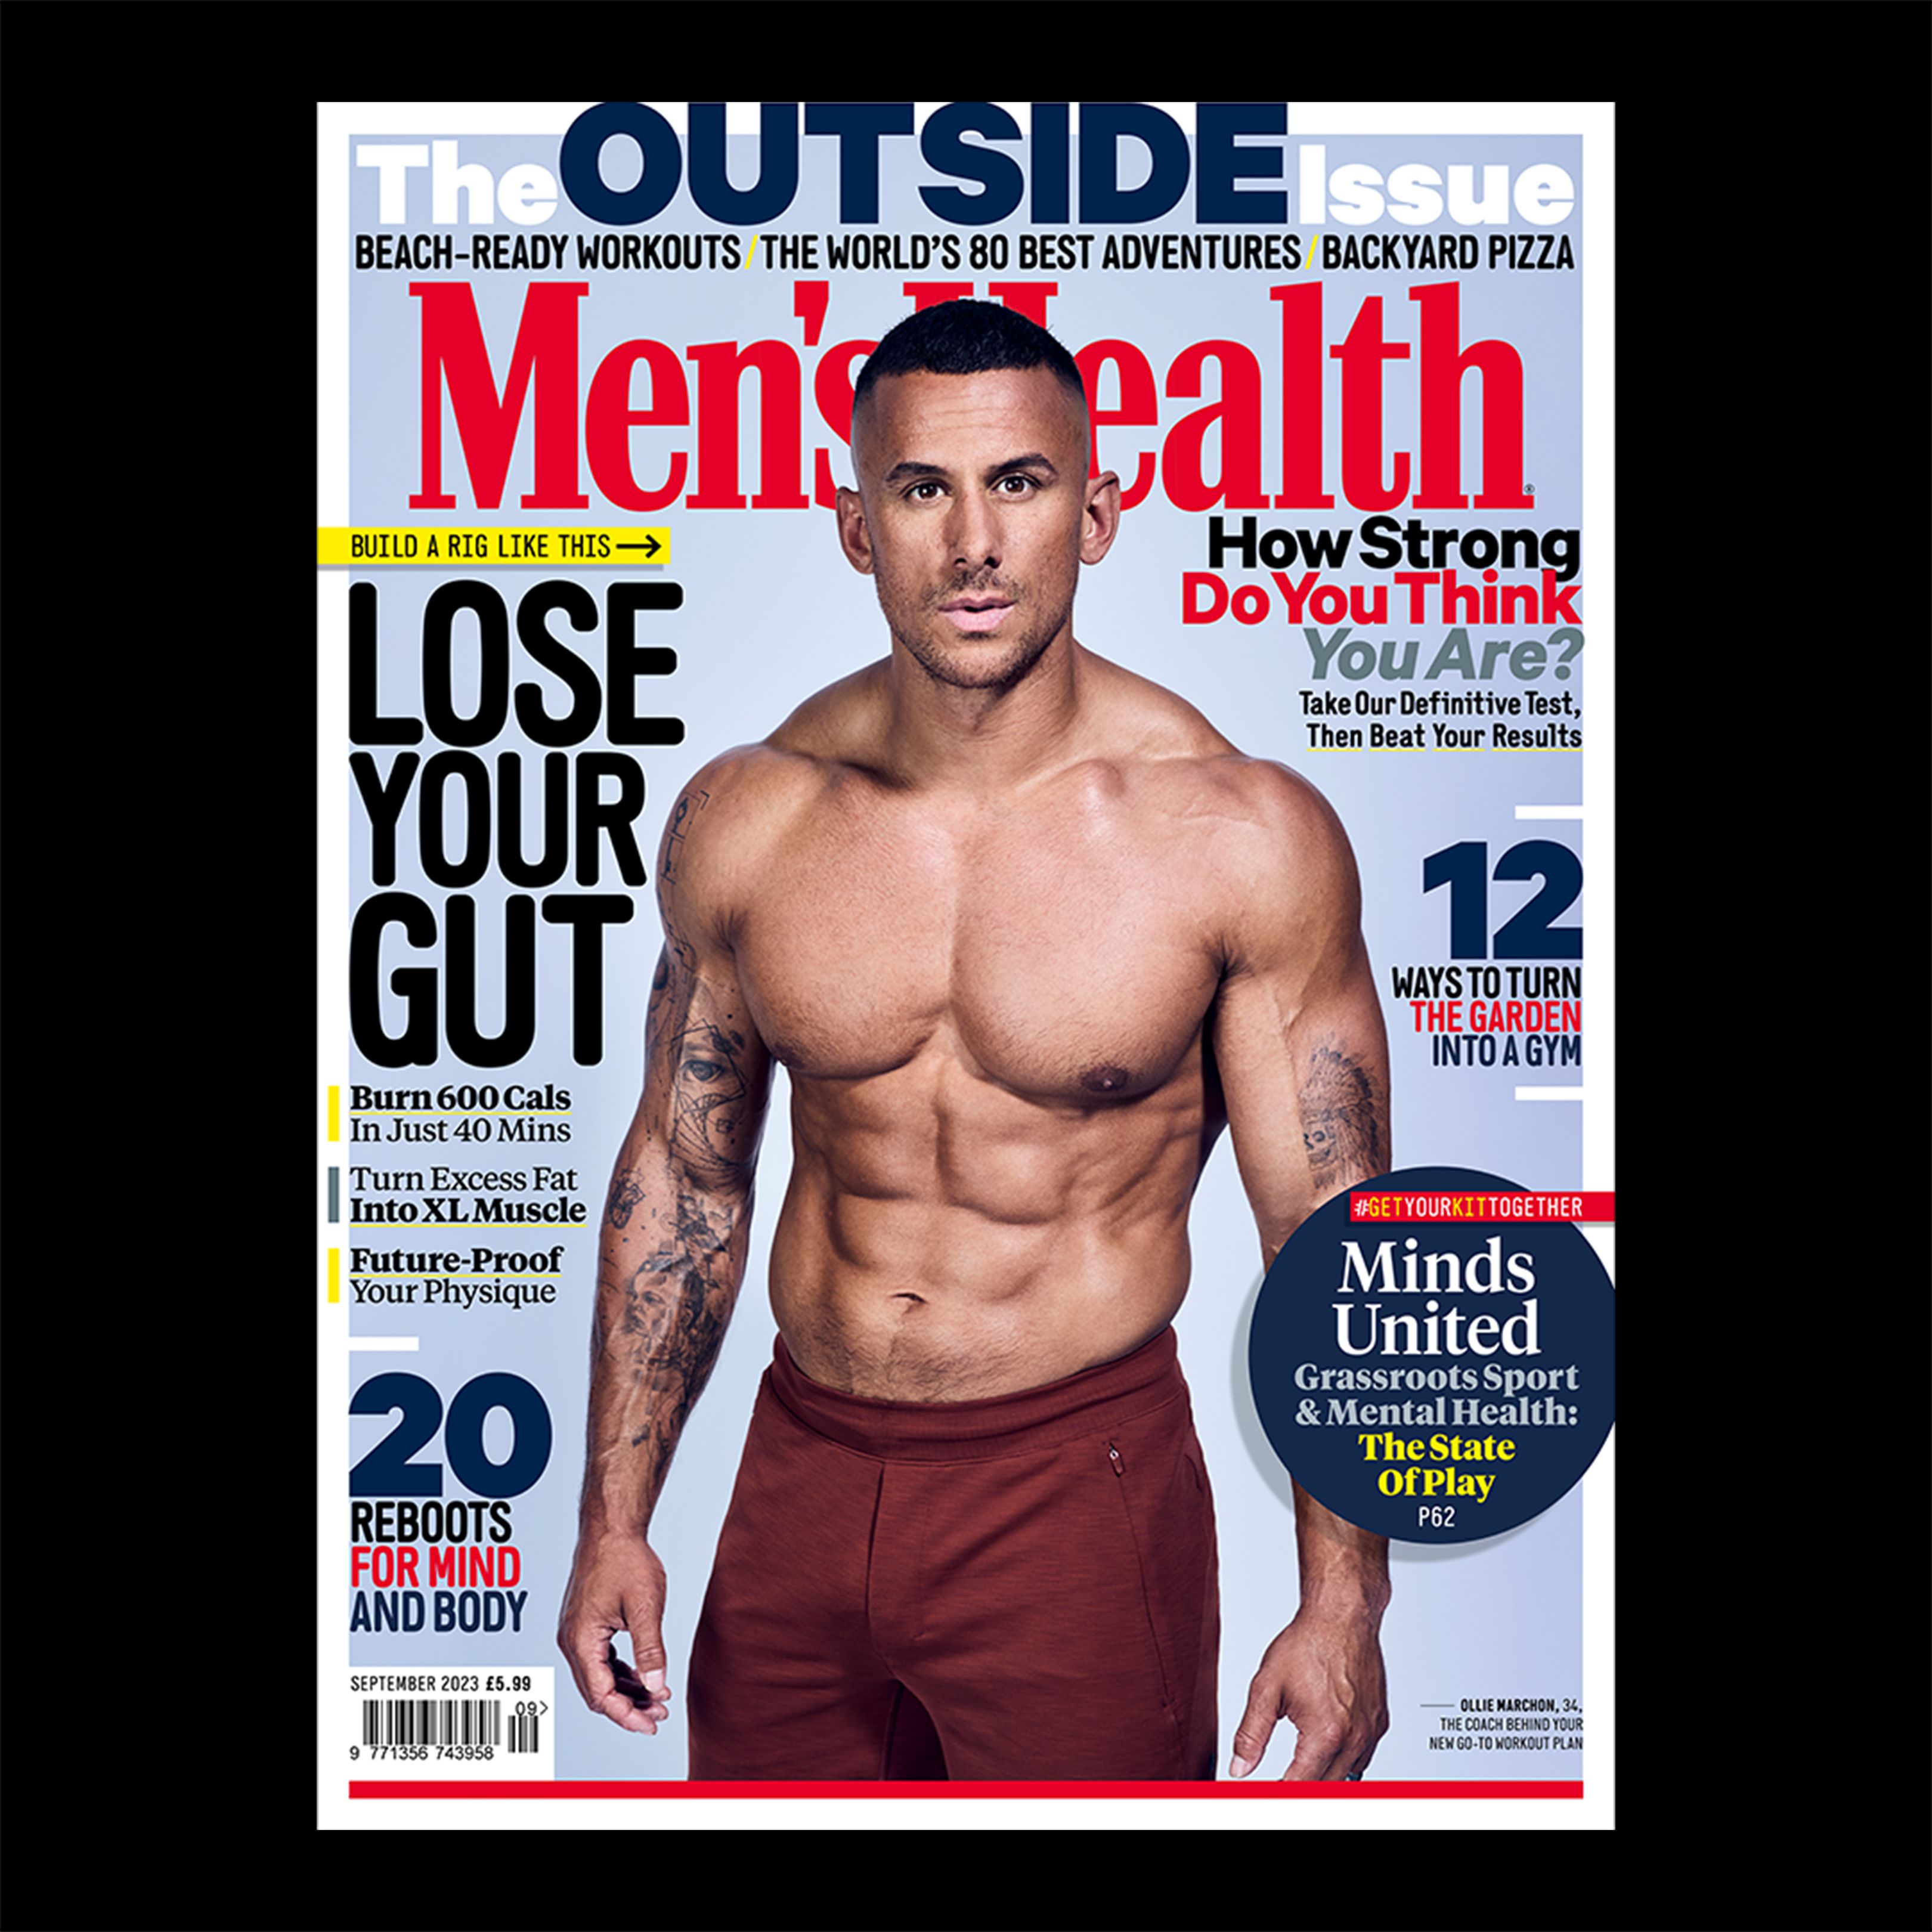 6 Great Reasons To Buy the September Issue of Mens Health picture pic